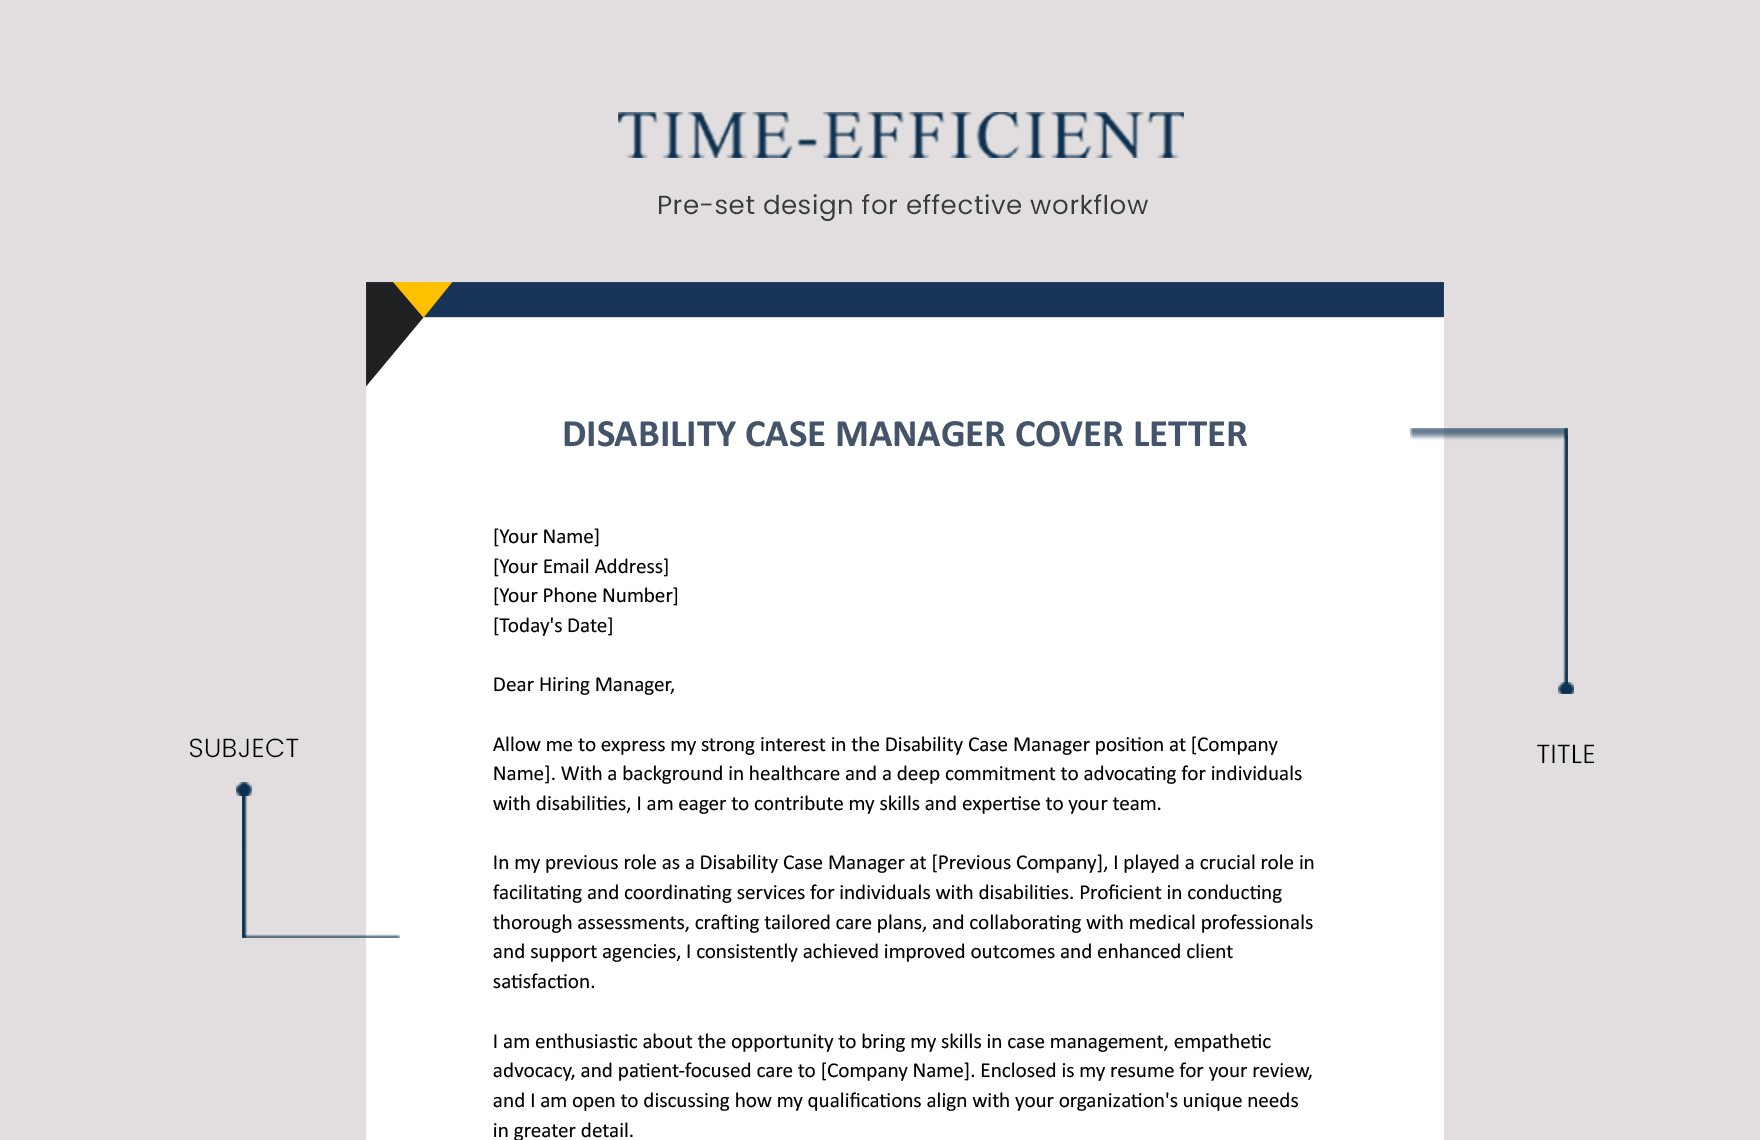 Disability Case Manager Cover Letter